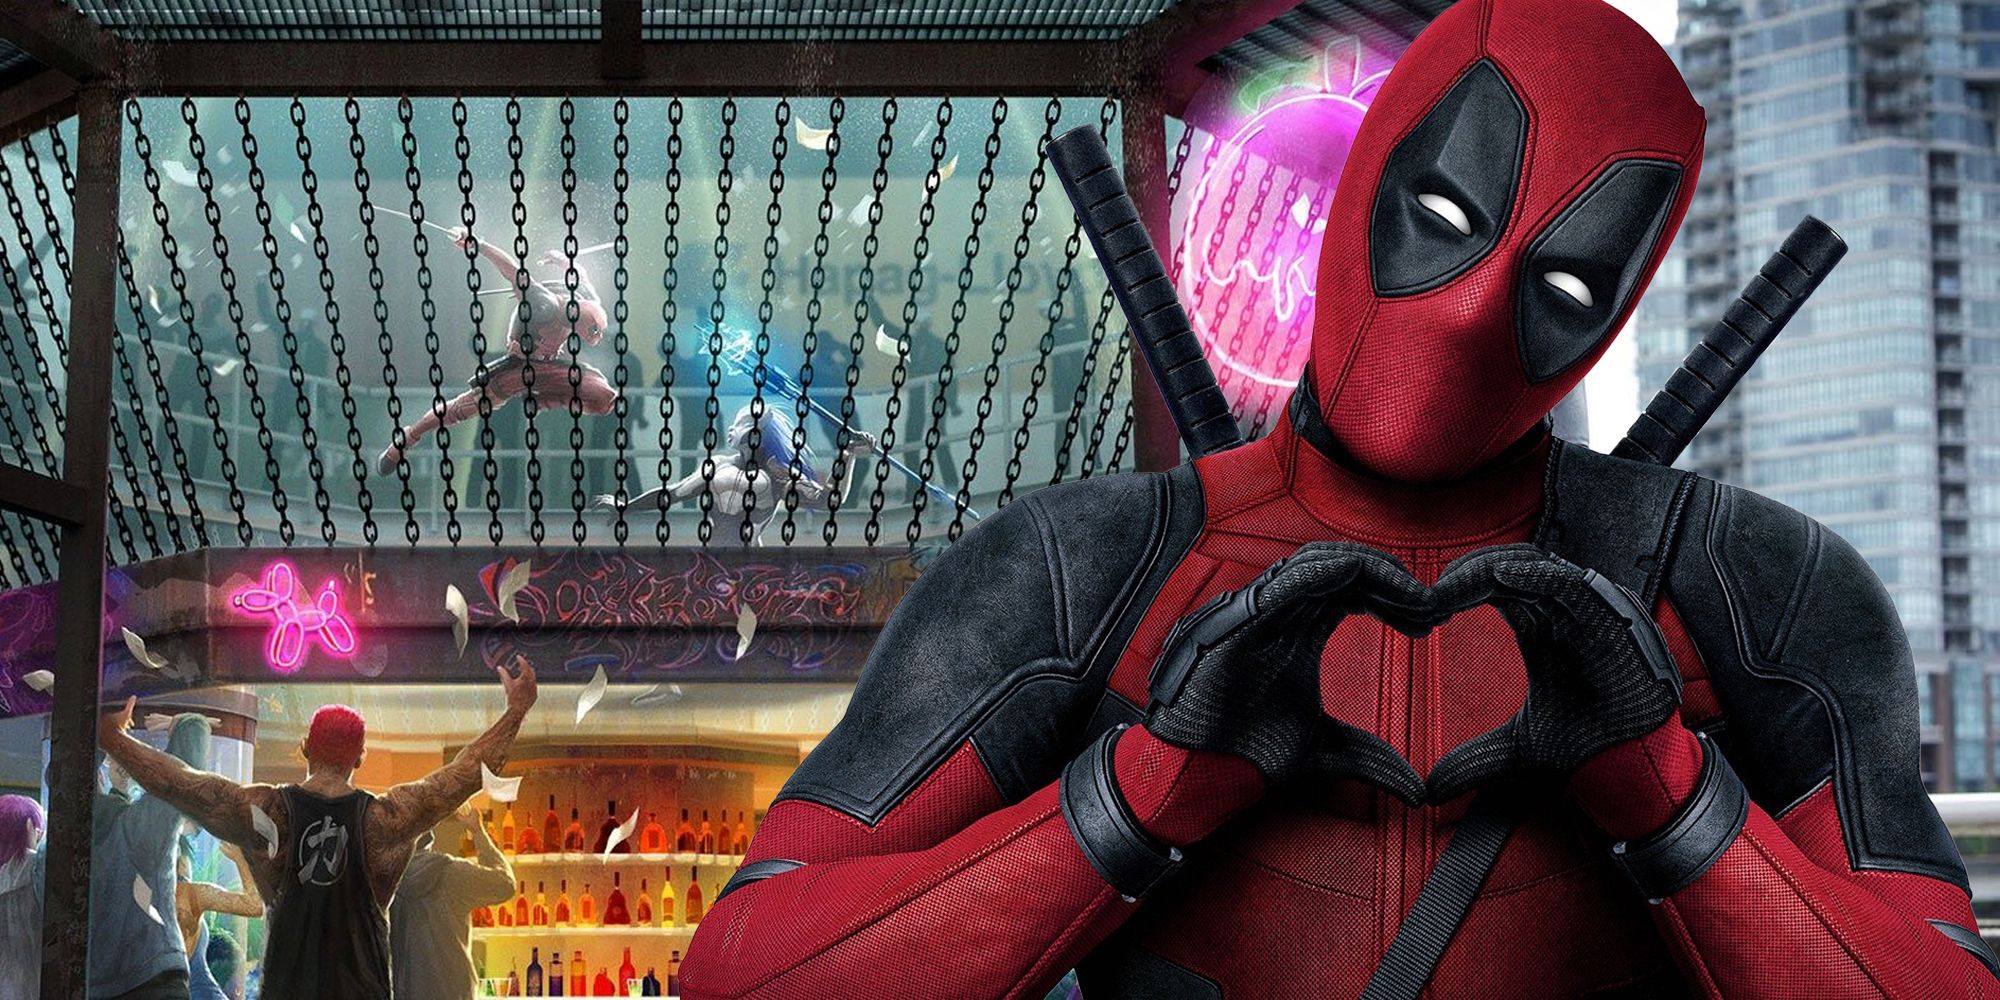 Shang-Chi's Scrapped Deadpool Cameo Hints At Alt Phase 4 Multiverse Plan